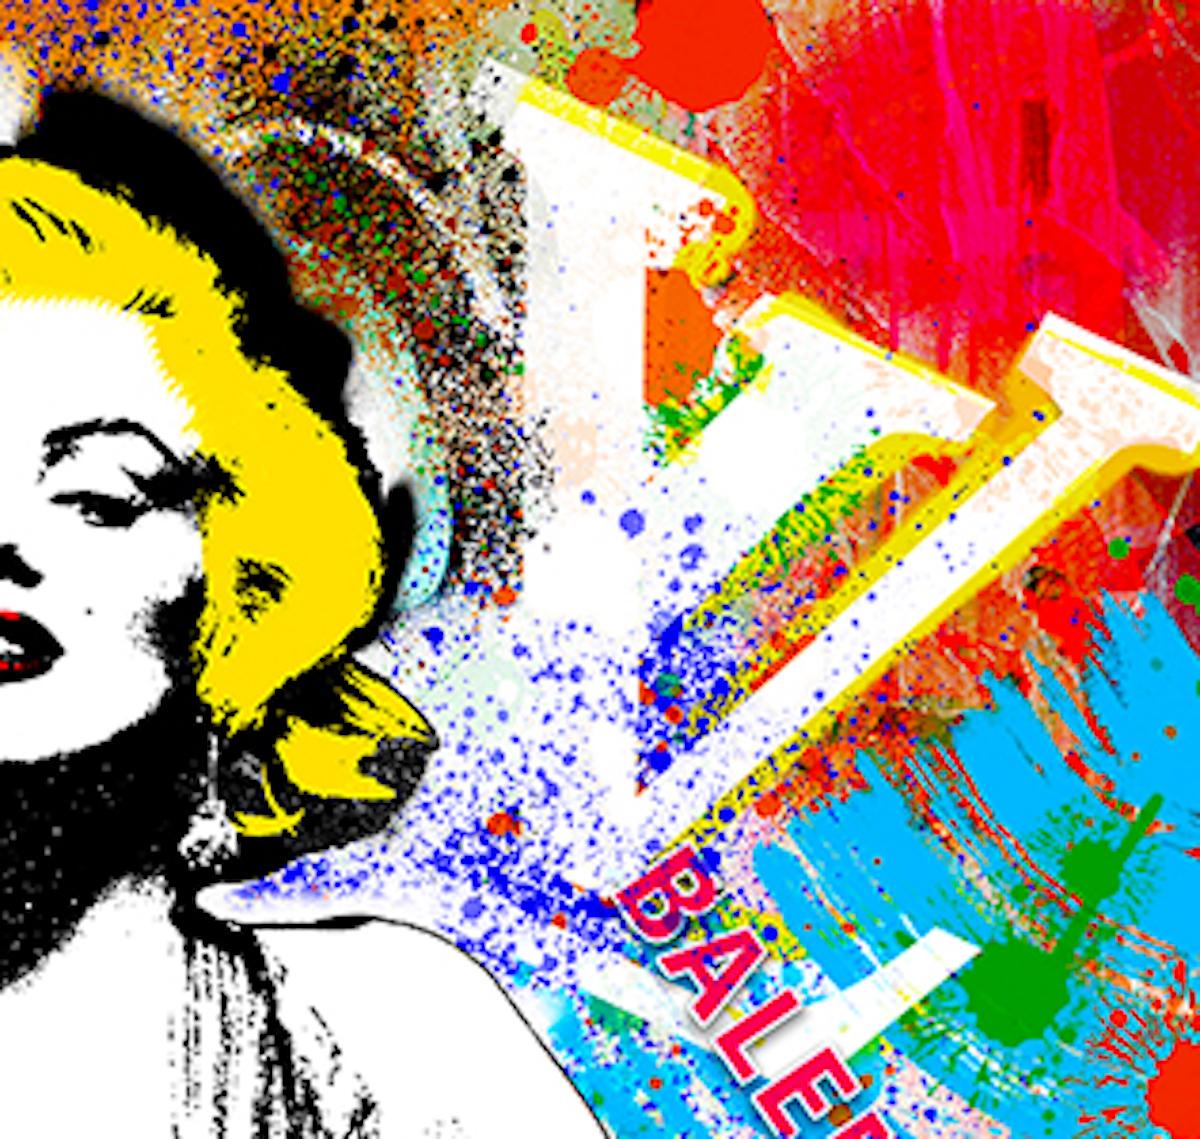 Marilyn as Vicky Debevoise, Famous Celebrity Artwork, Hollywood Art, Urban Art - Beige Portrait Painting by Agent X